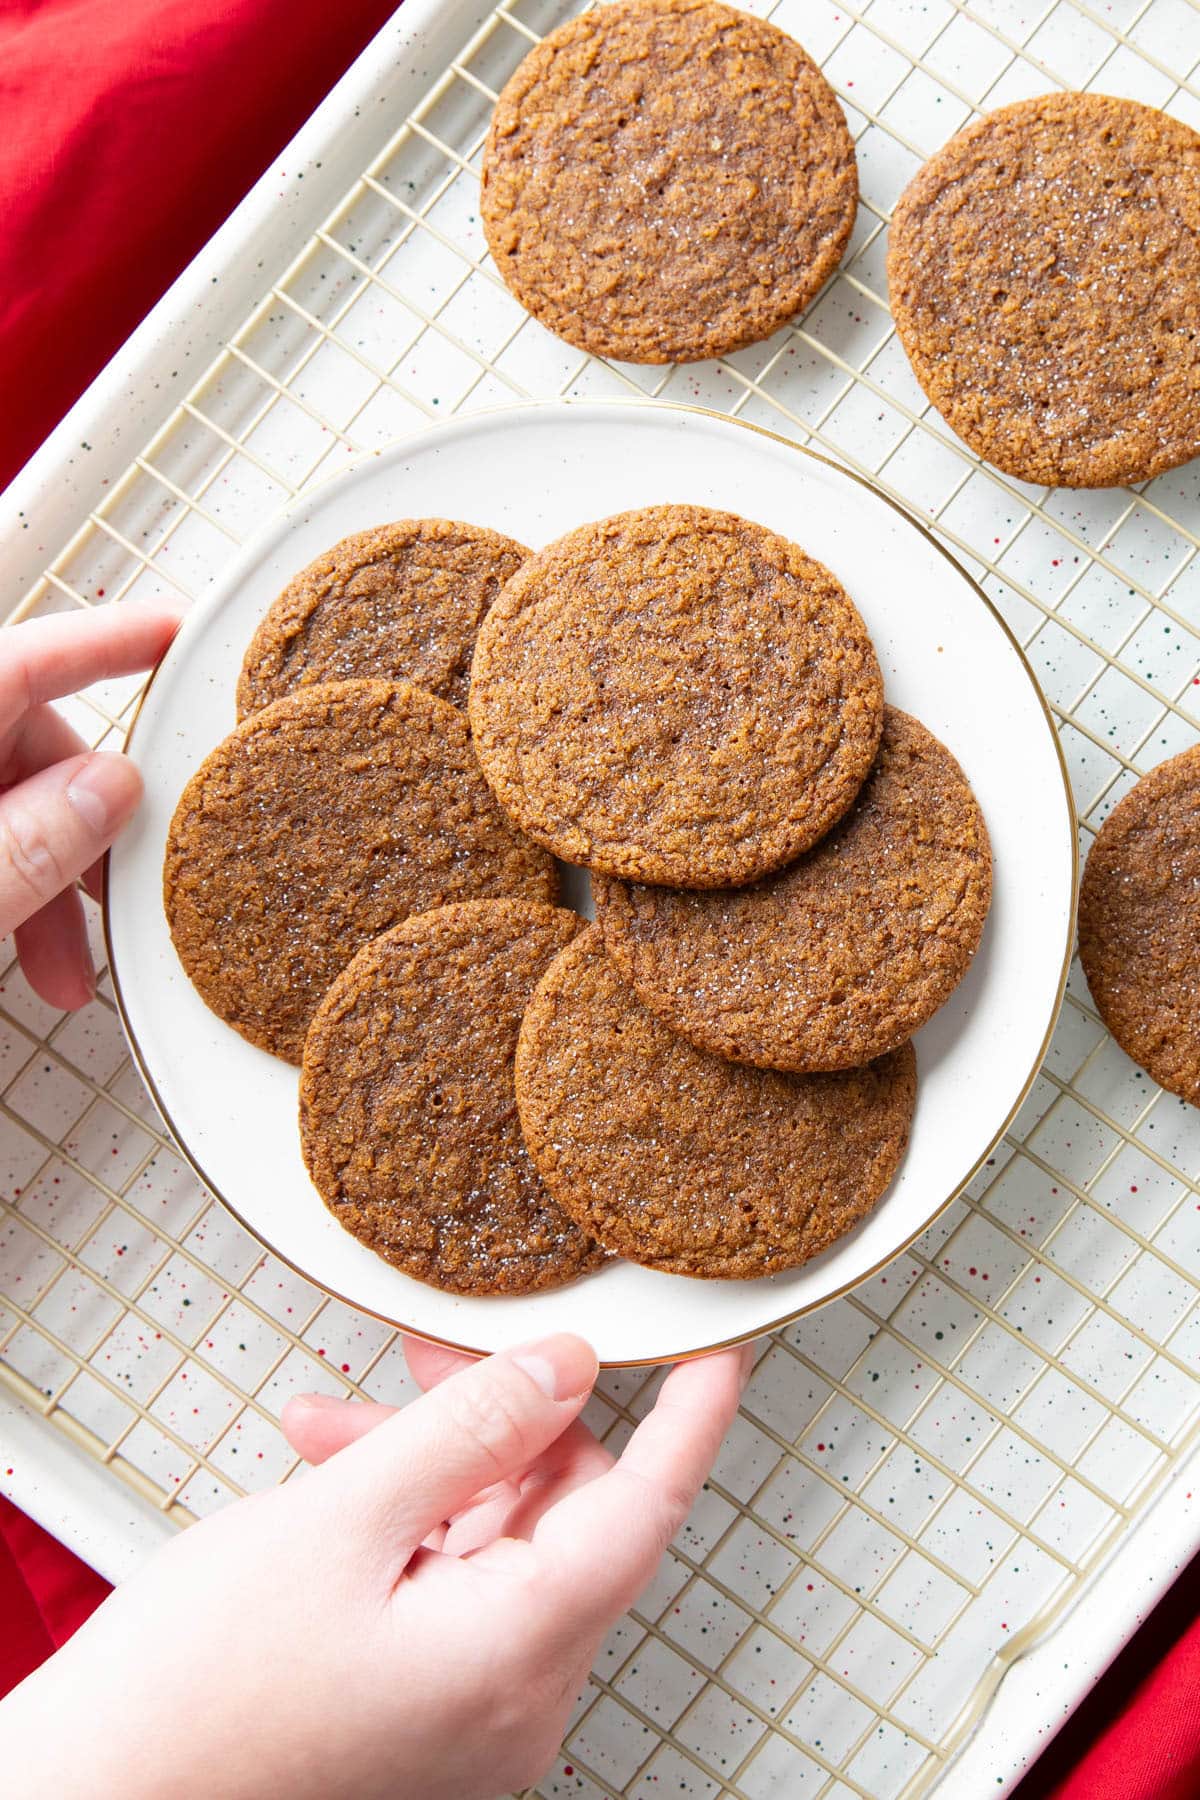 Hands presenting a plate of this gingersnap cookie recipe